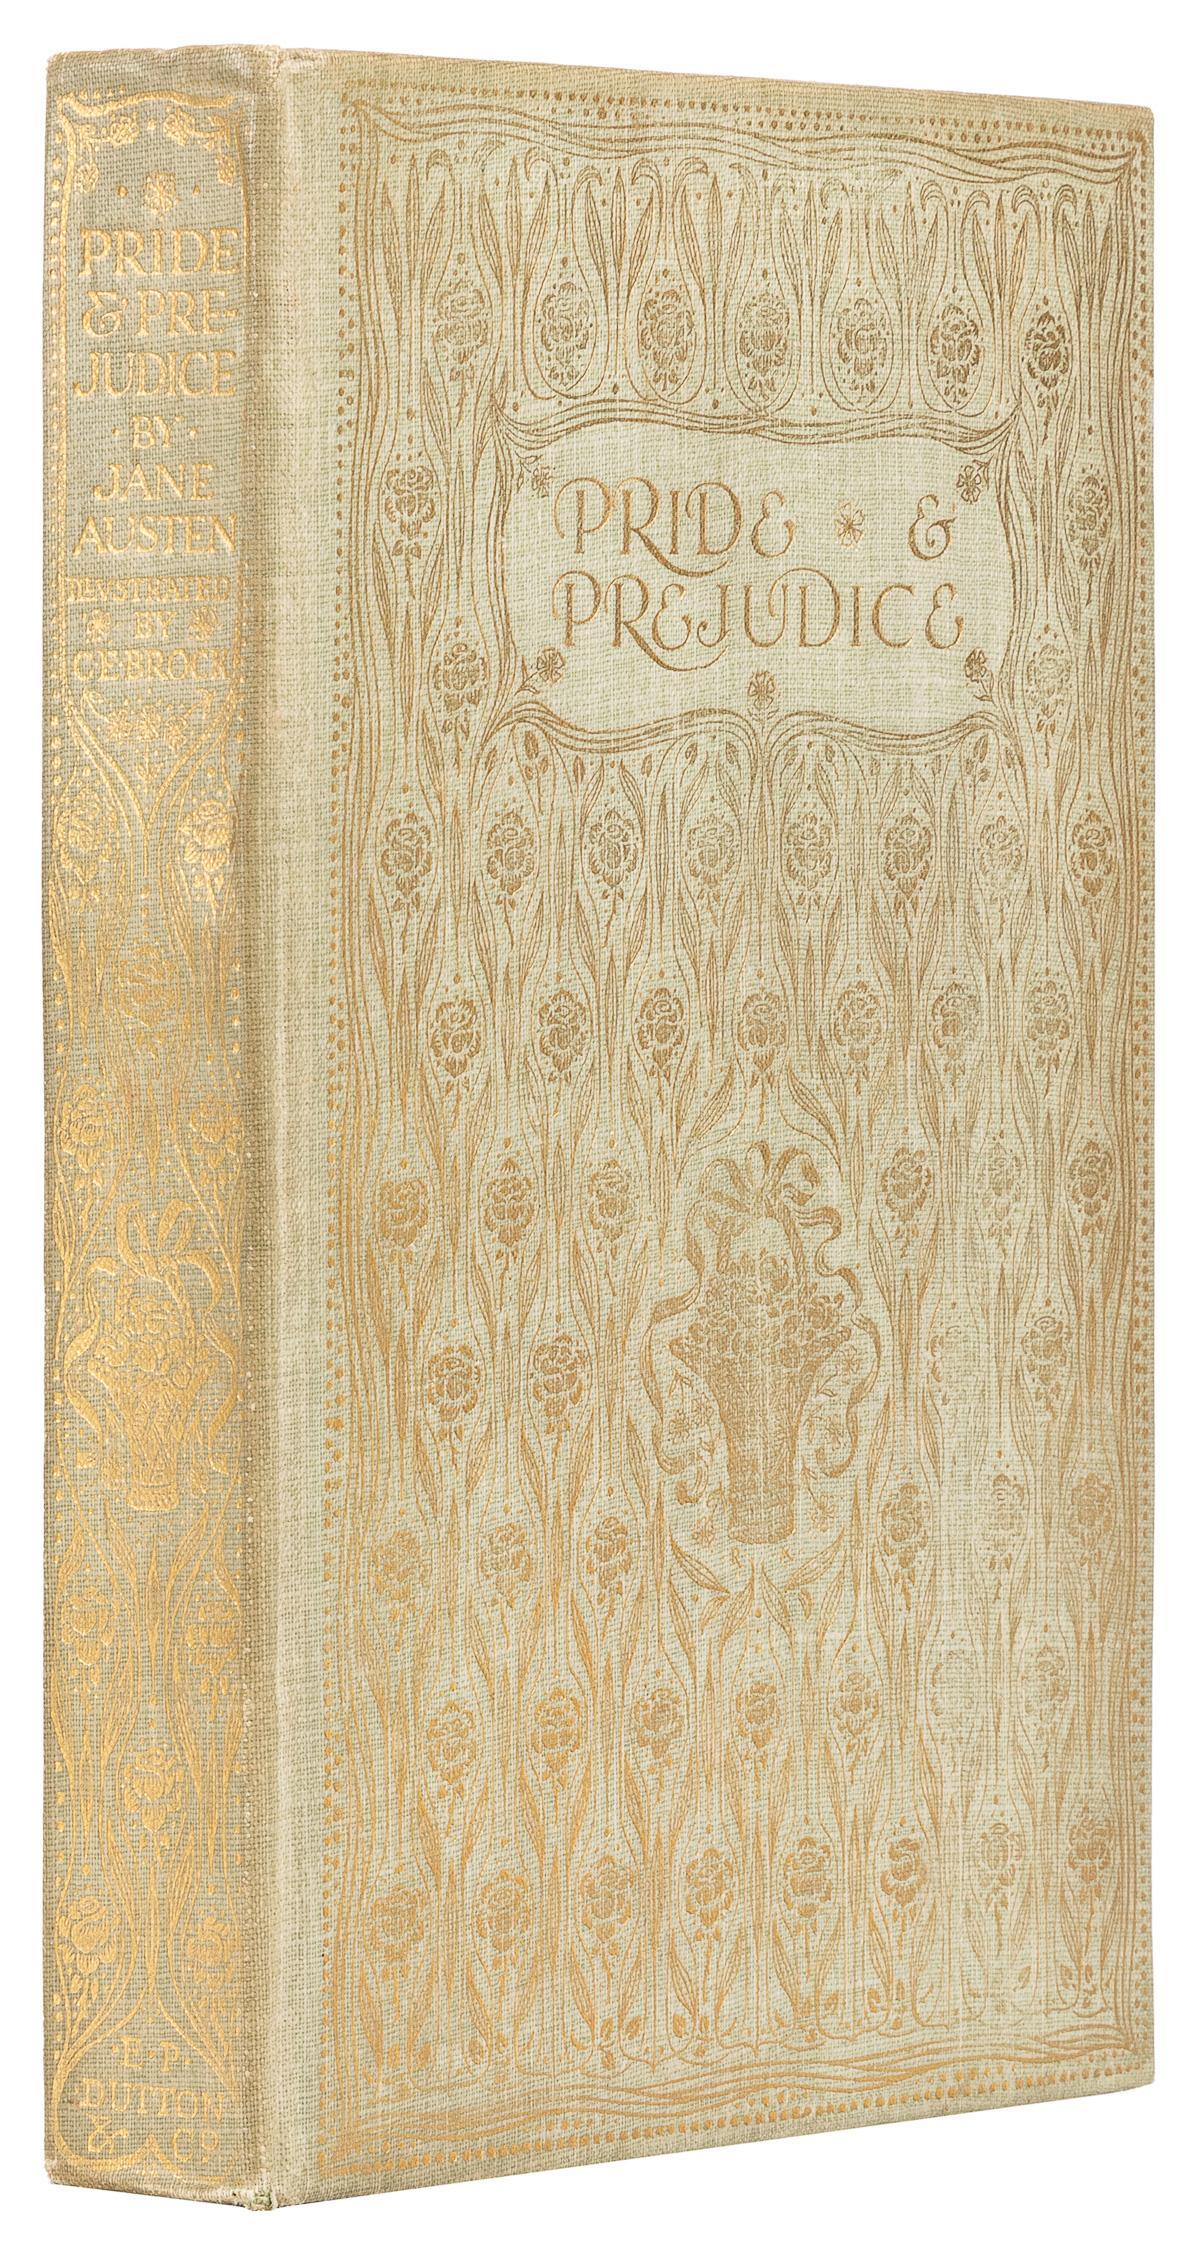 Early 20th Century Pride & Prejudice by Jane Austen, Illustrated by C. E. Brock, 1907